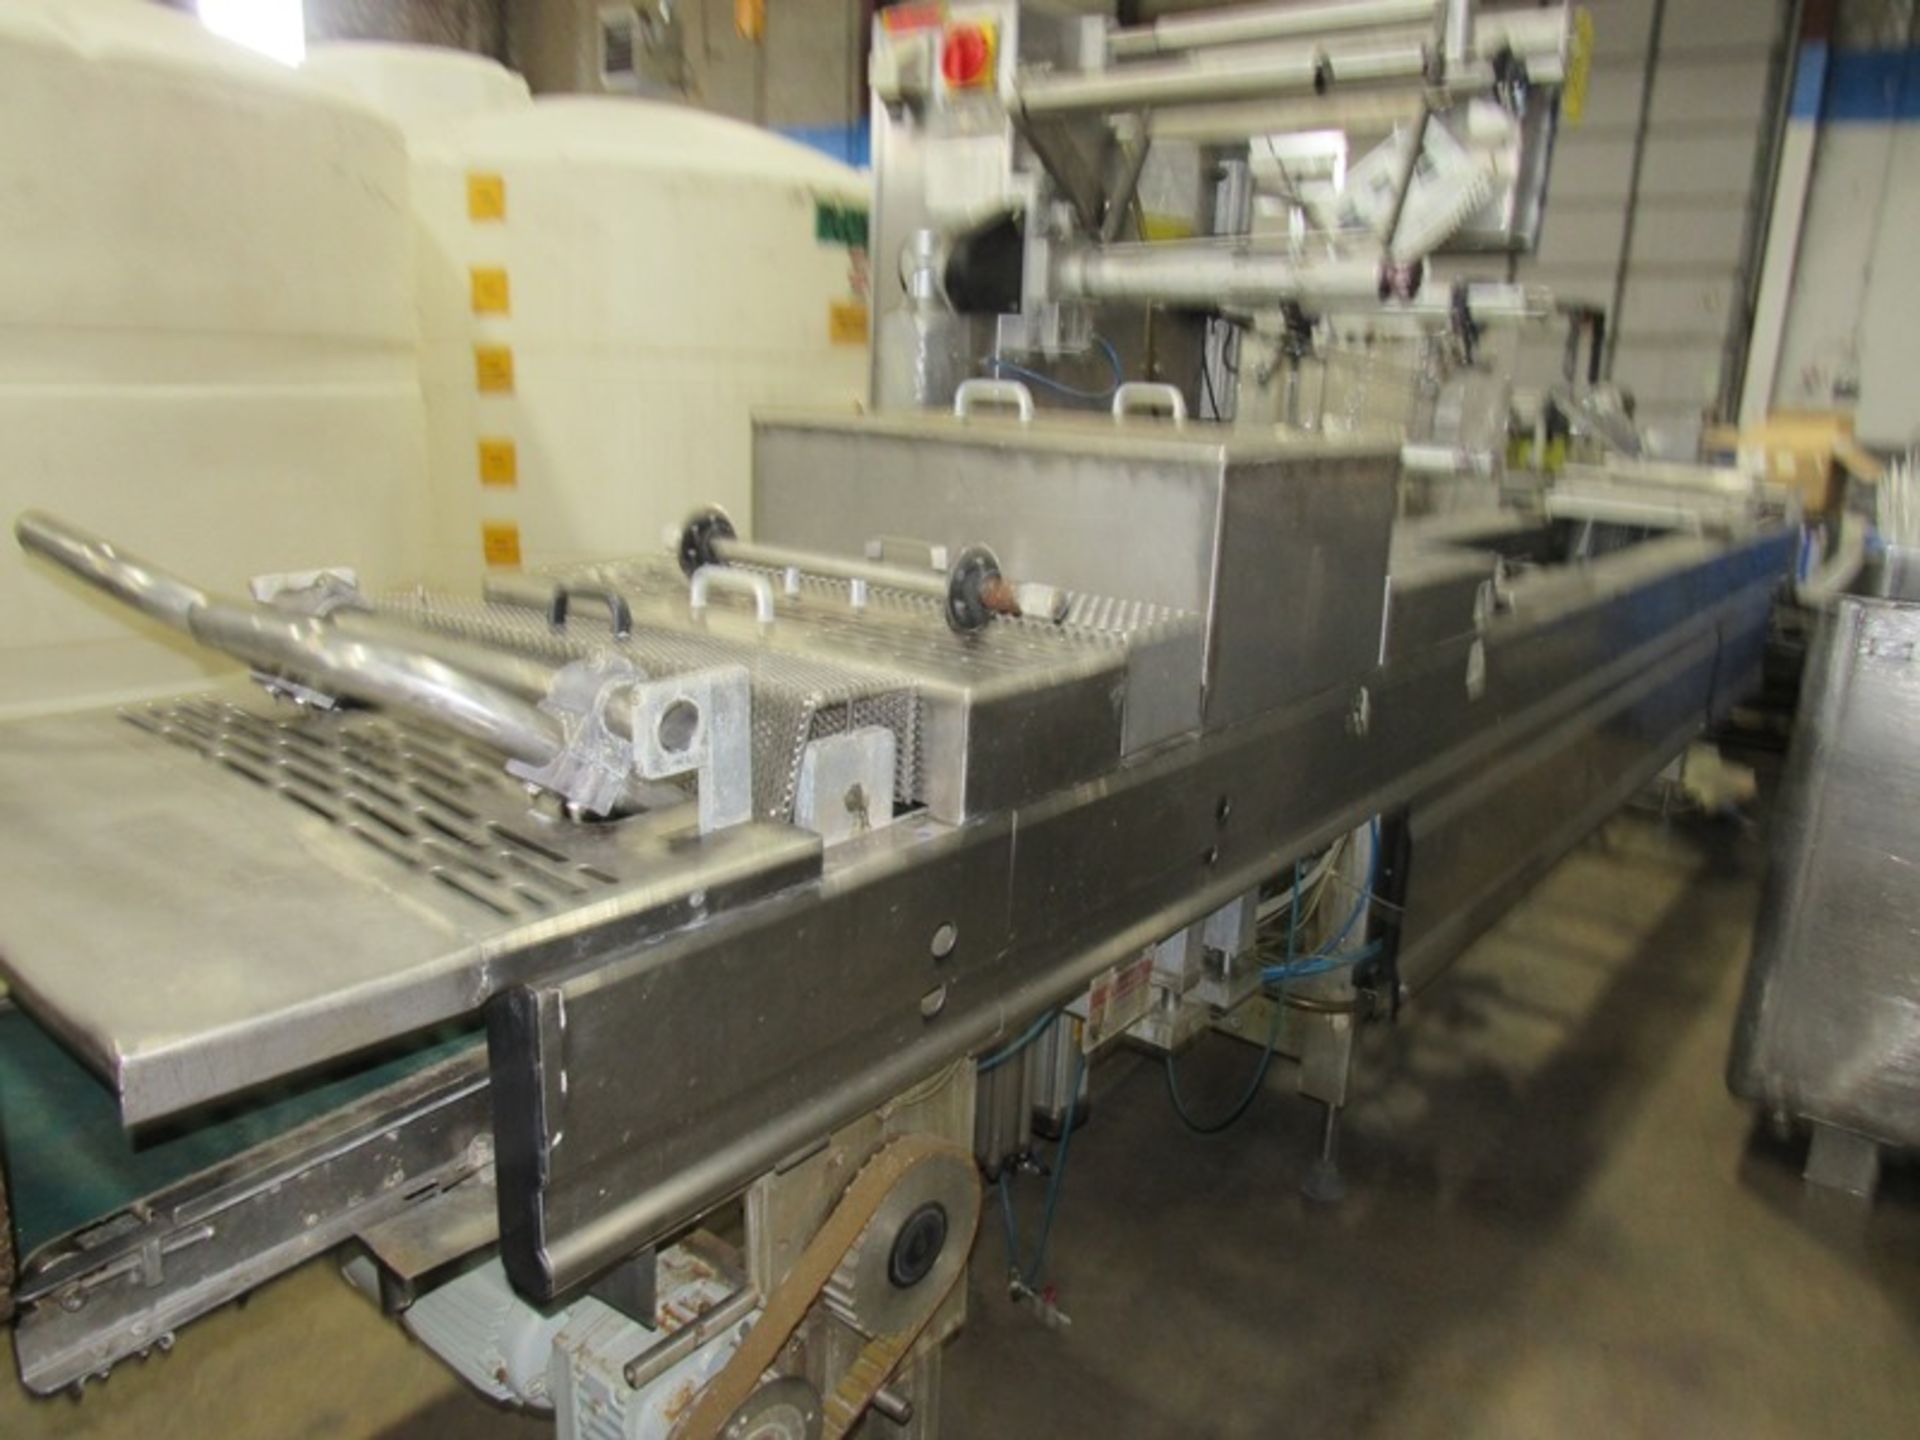 Multivac Rollstock Thermoformer Packaging Machine, 16 5/8" between chains, approx. 13 1/2"